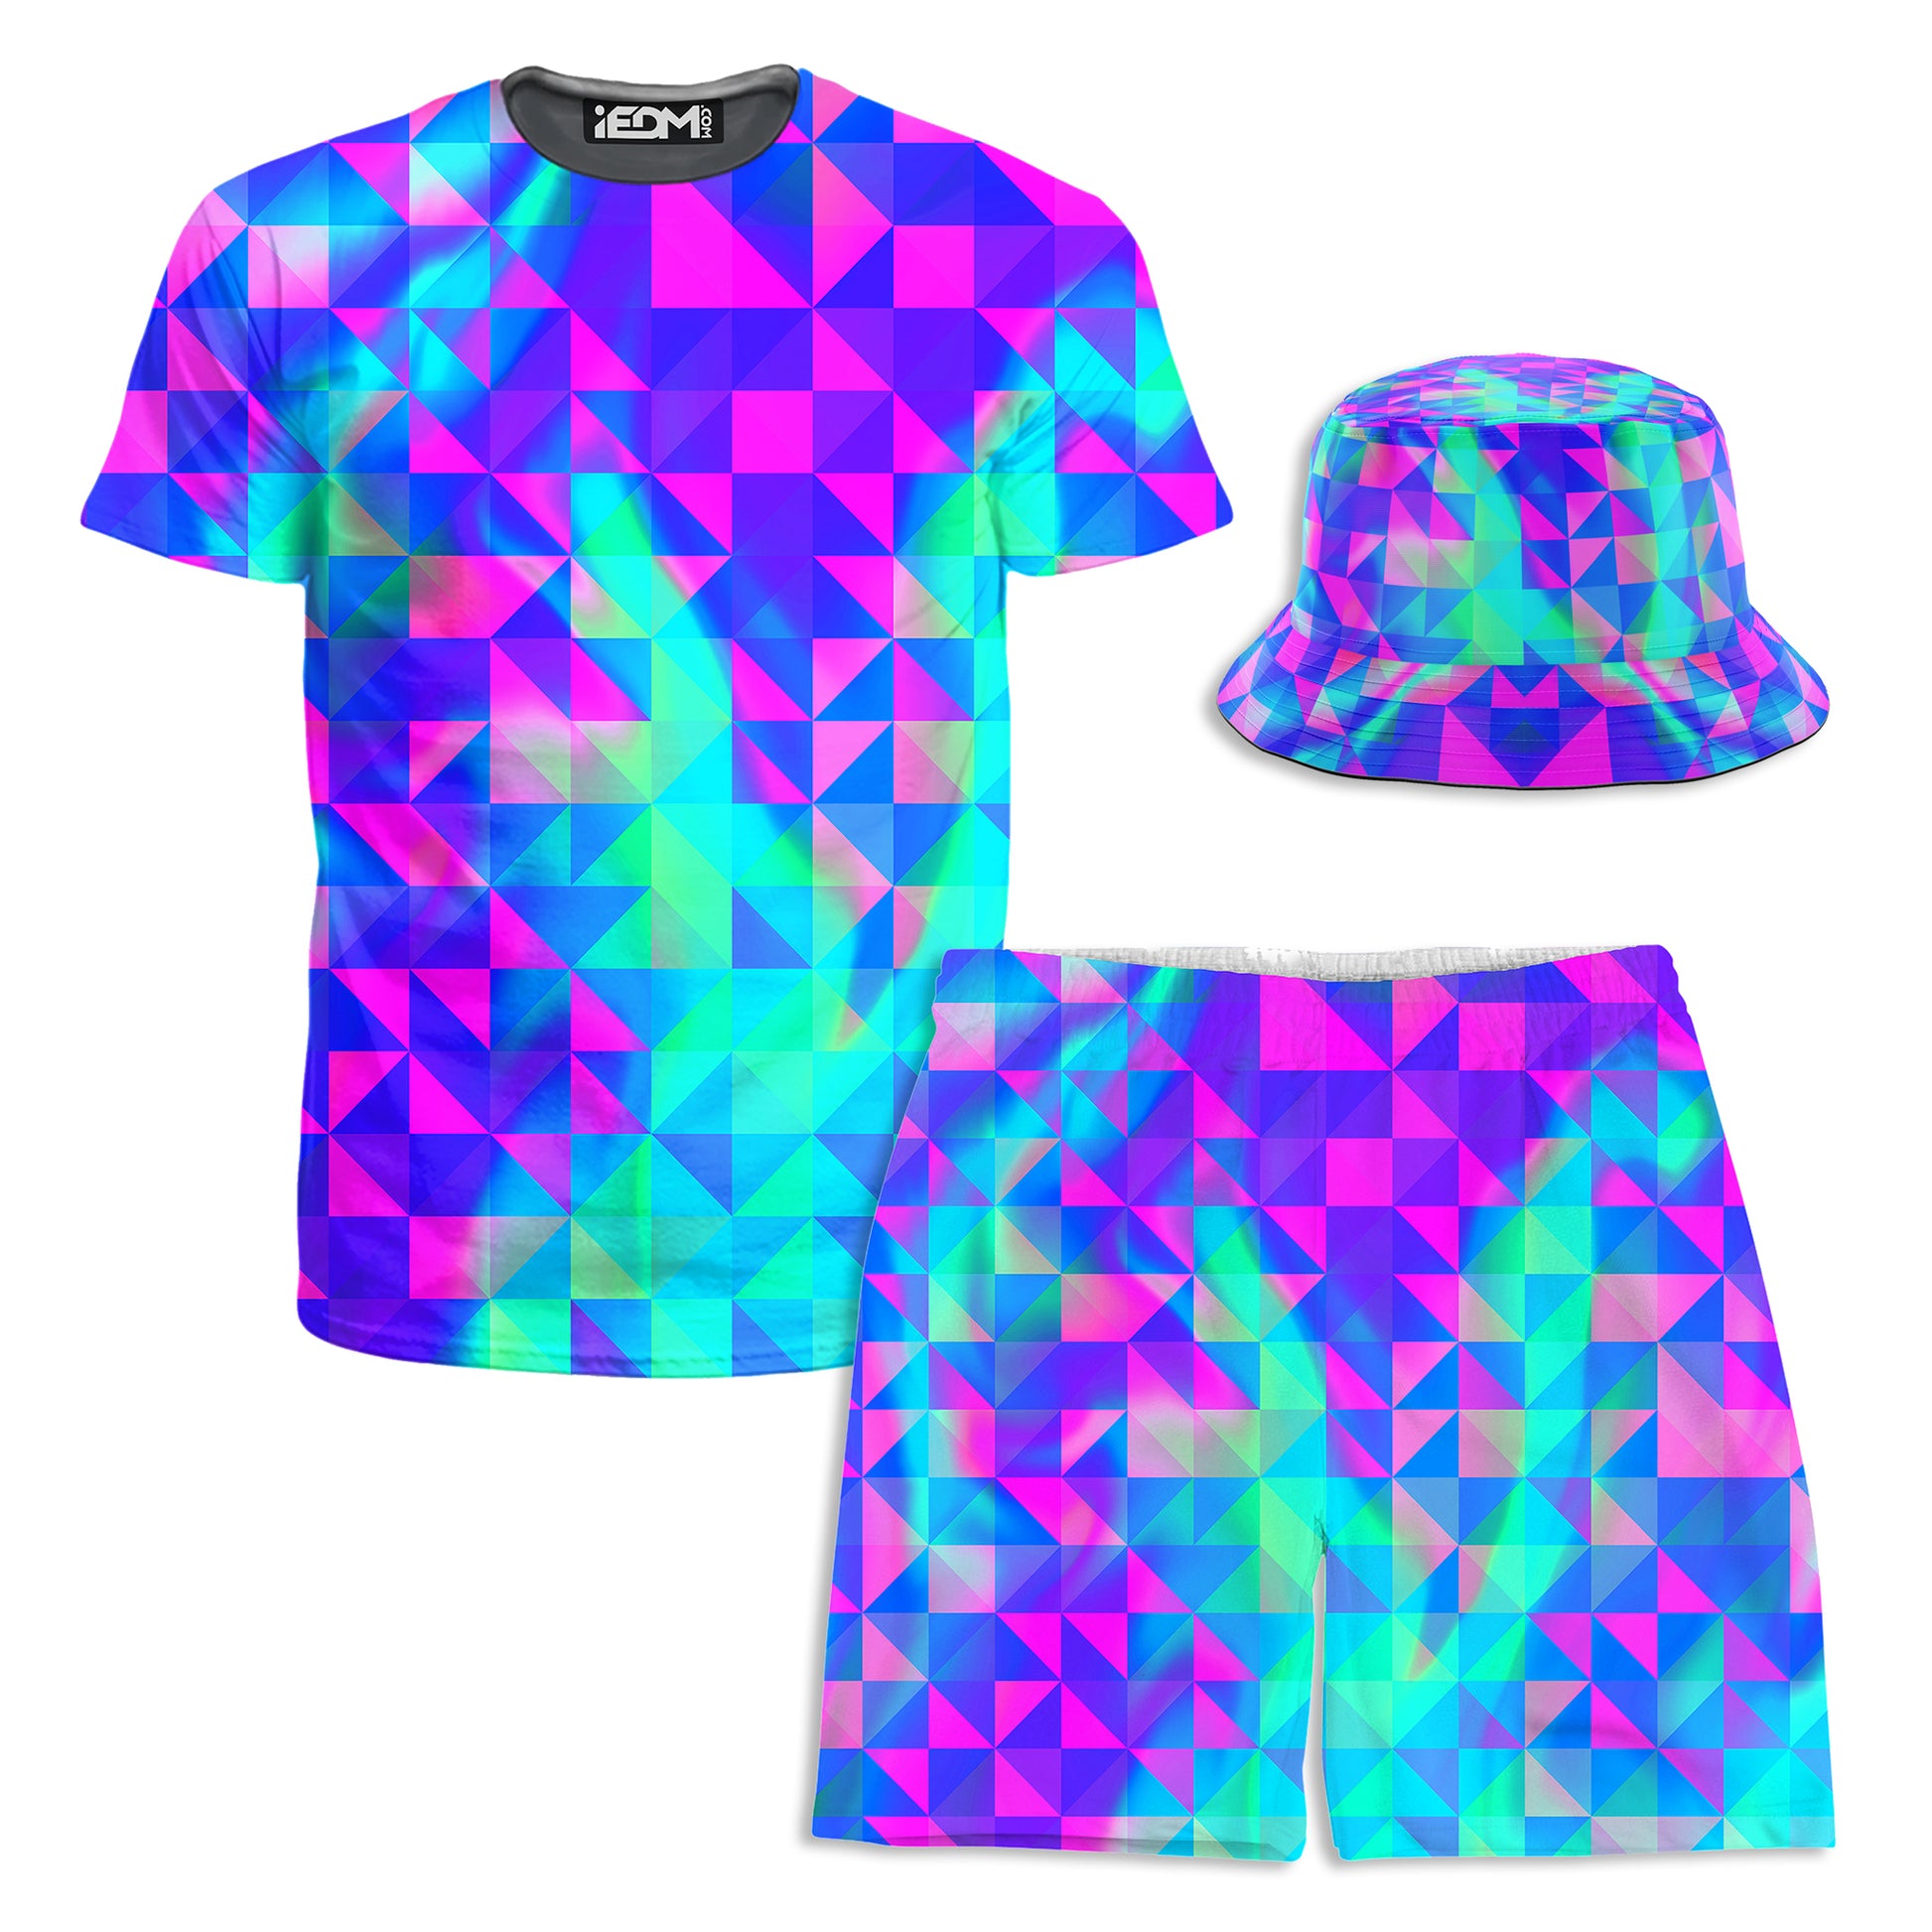 Raspberry Iced Tea T-Shirt and Shorts with Bucket Hat Combo, Noctum X Truth, | iEDM